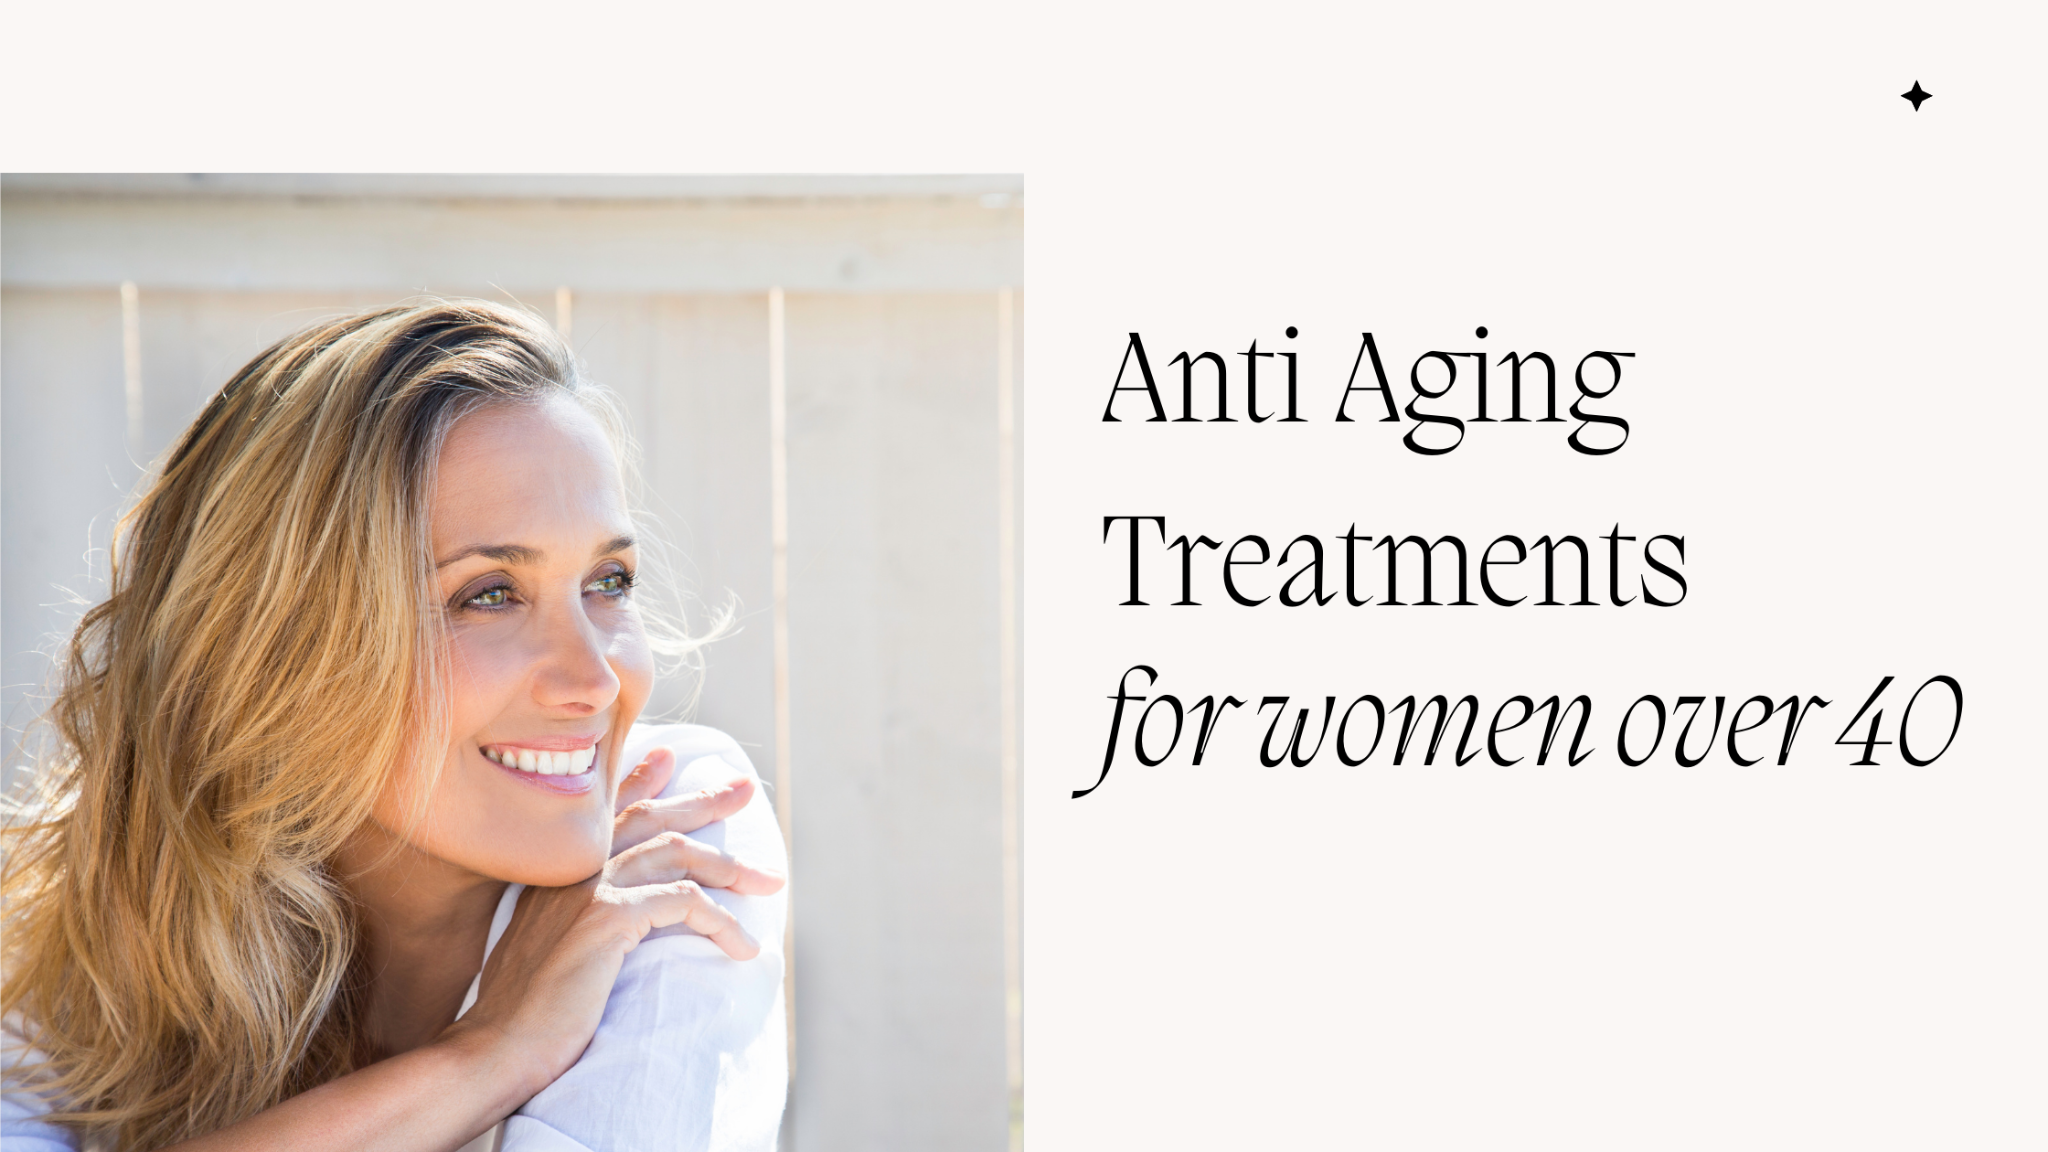 5 Anti-Aging Treatments for Women Over 40